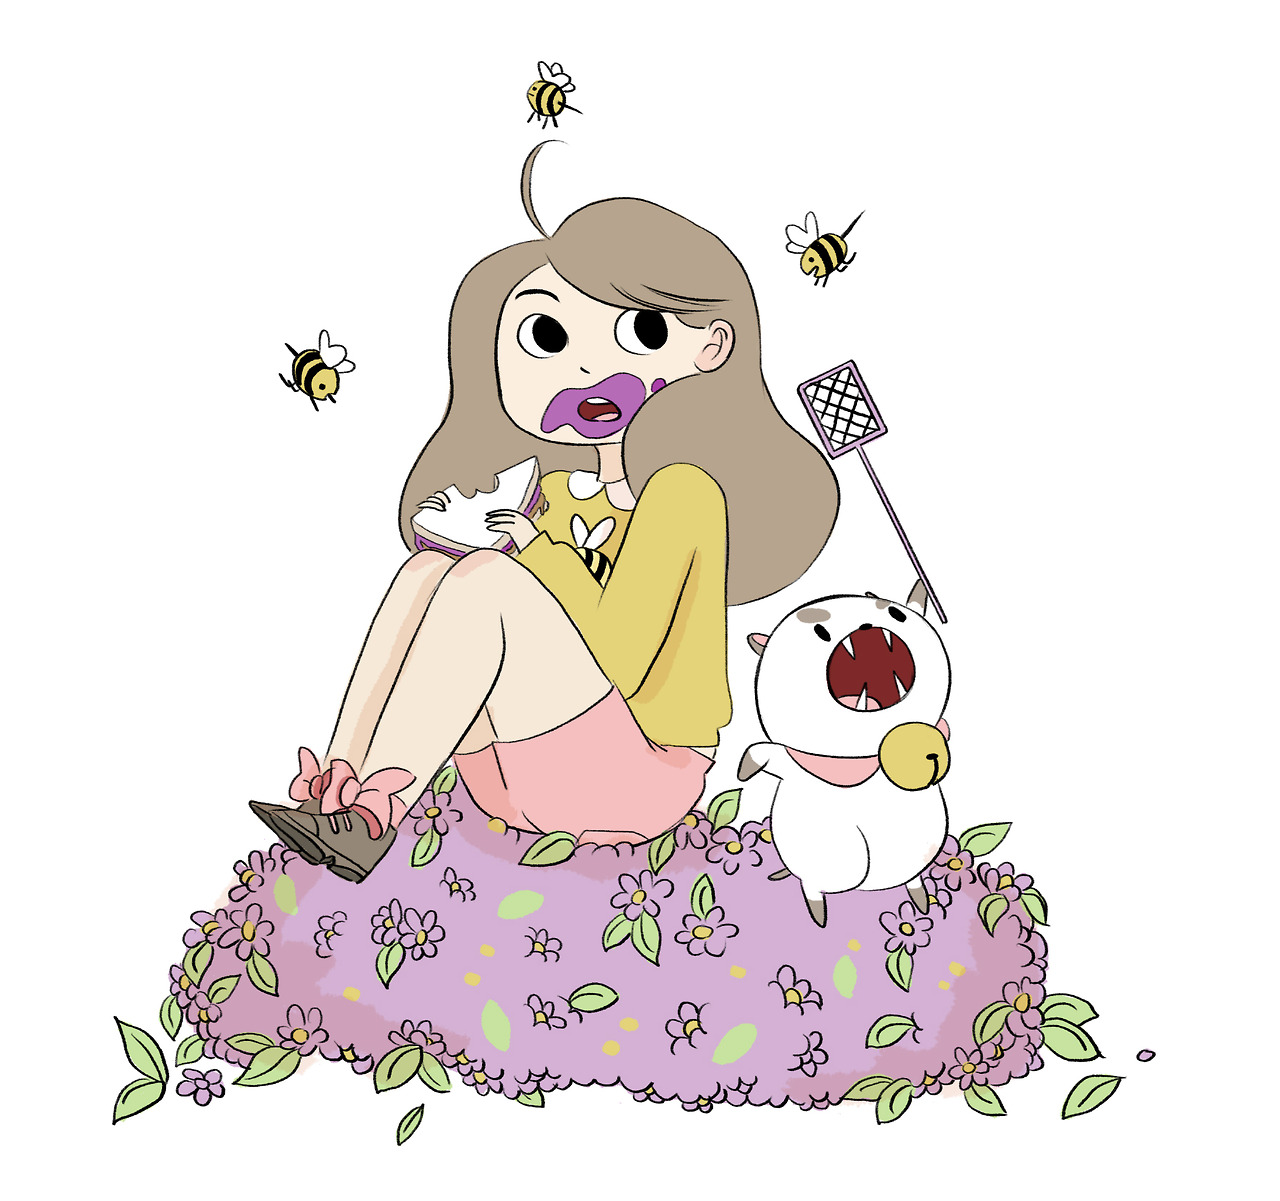 WATCH: The first two episodes of Natasha Allegri's Bee and PuppyCat